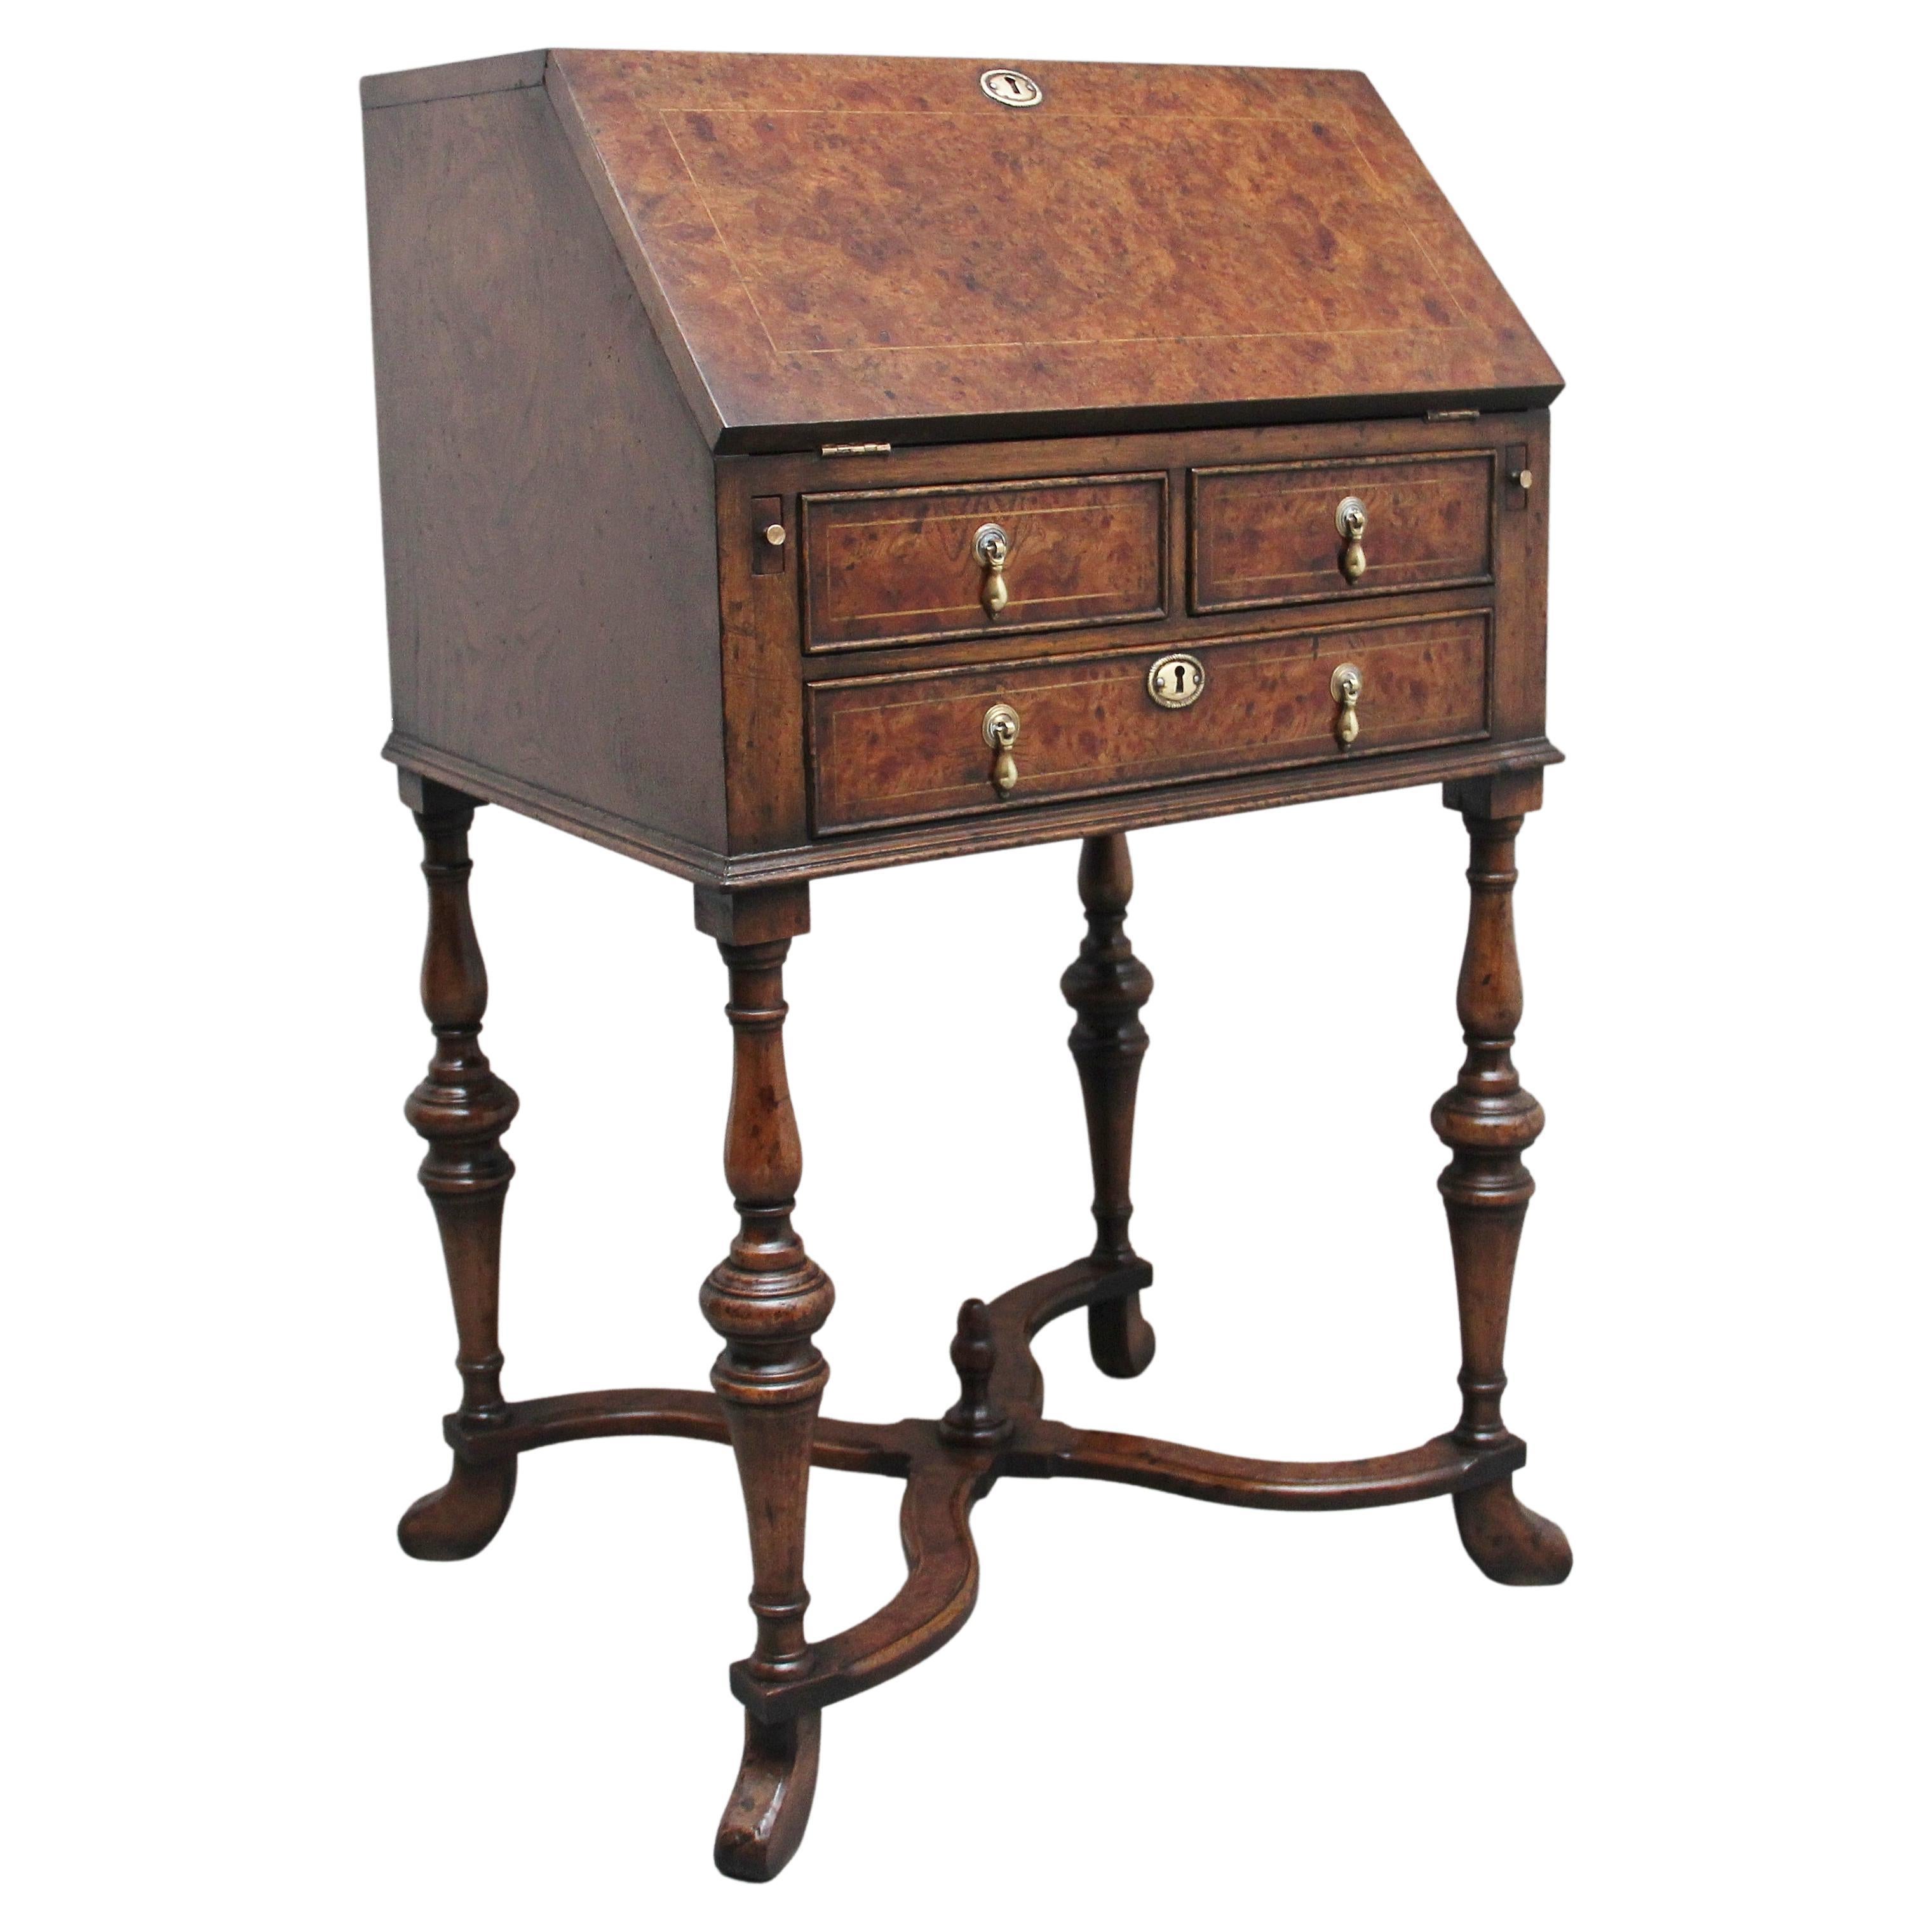 Early 20th Century Walnut and Elm Bureau in the Queen Anne Style